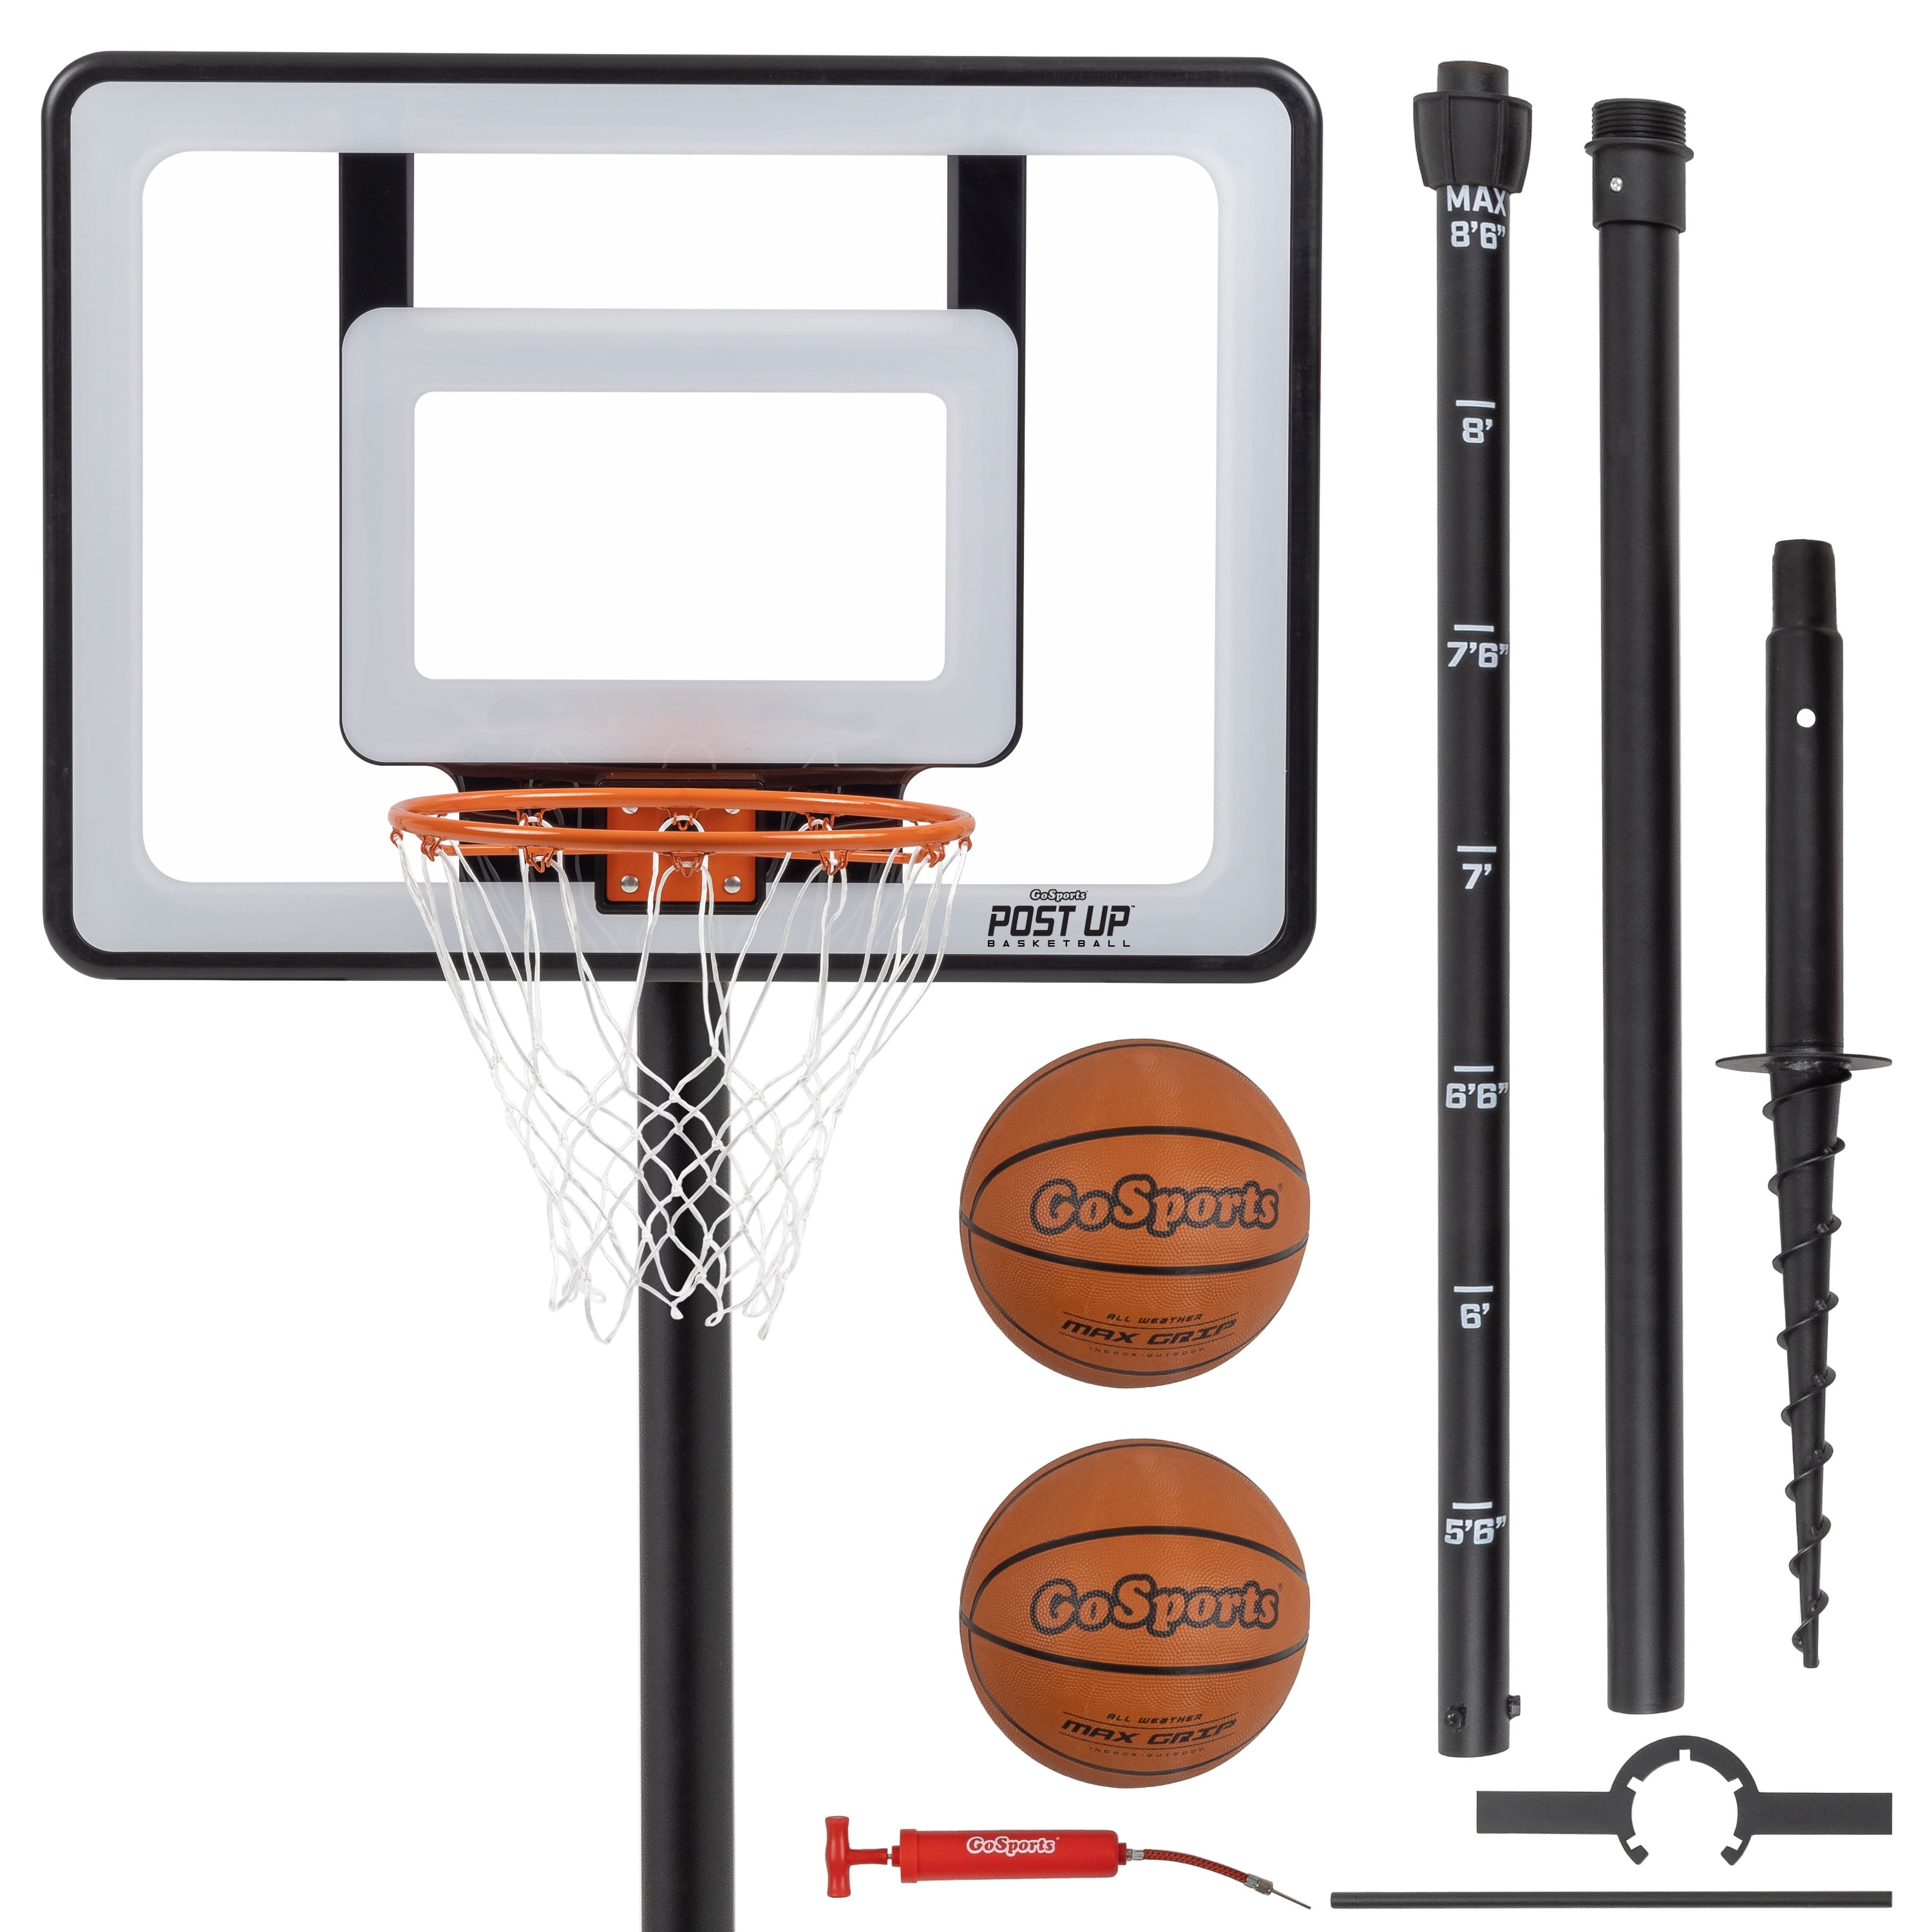 How to Secure a Portable Basketball Hoop: Expert Tips for Maximum Stability